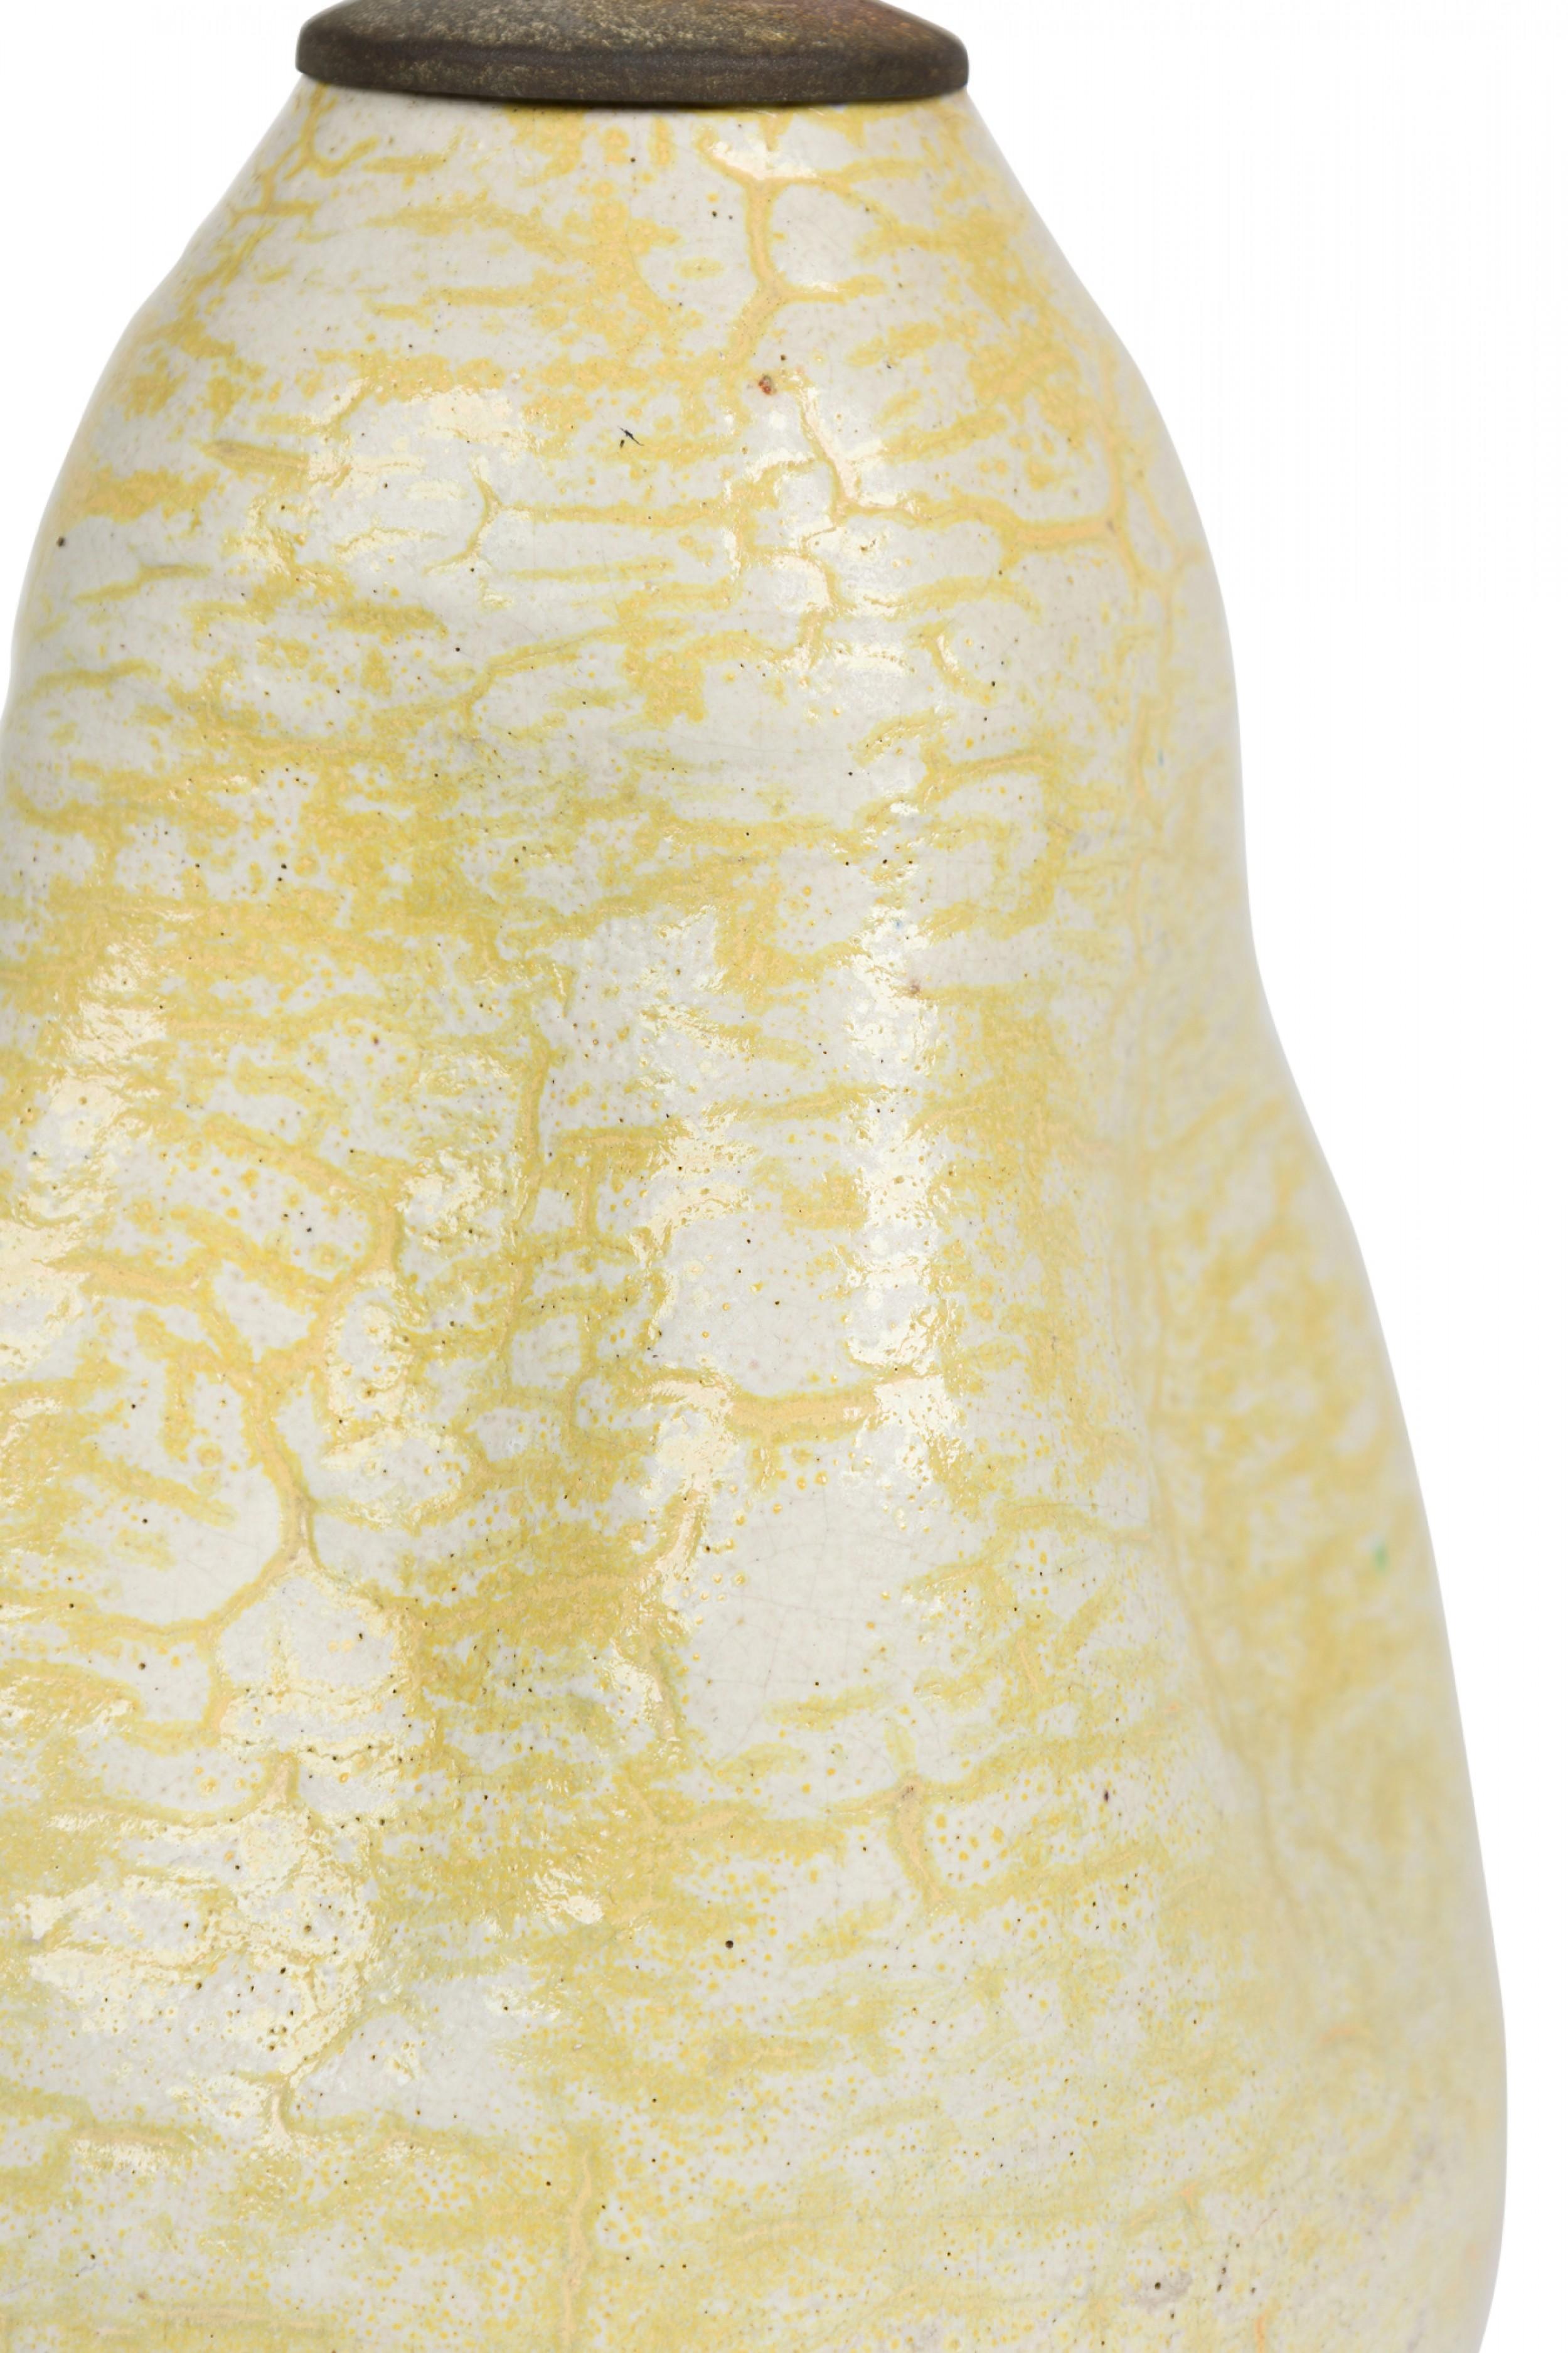 Mid-Century Modern Mid-Century American Ceramic Pinched Table Lamp in Canary Yellow and White Glaze For Sale